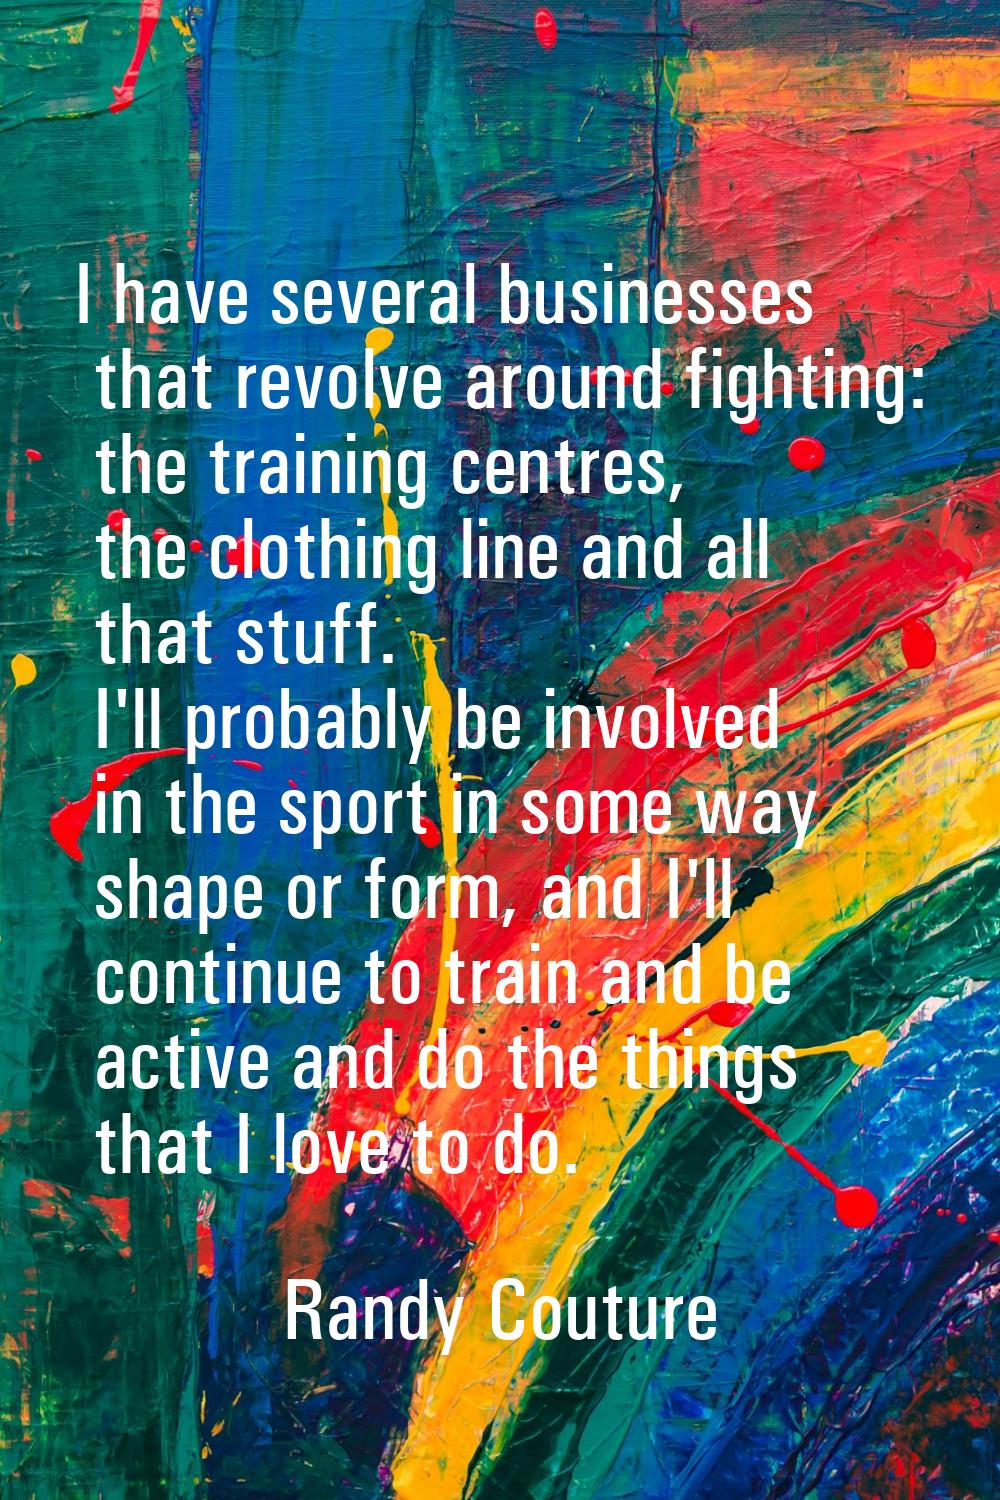 I have several businesses that revolve around fighting: the training centres, the clothing line and